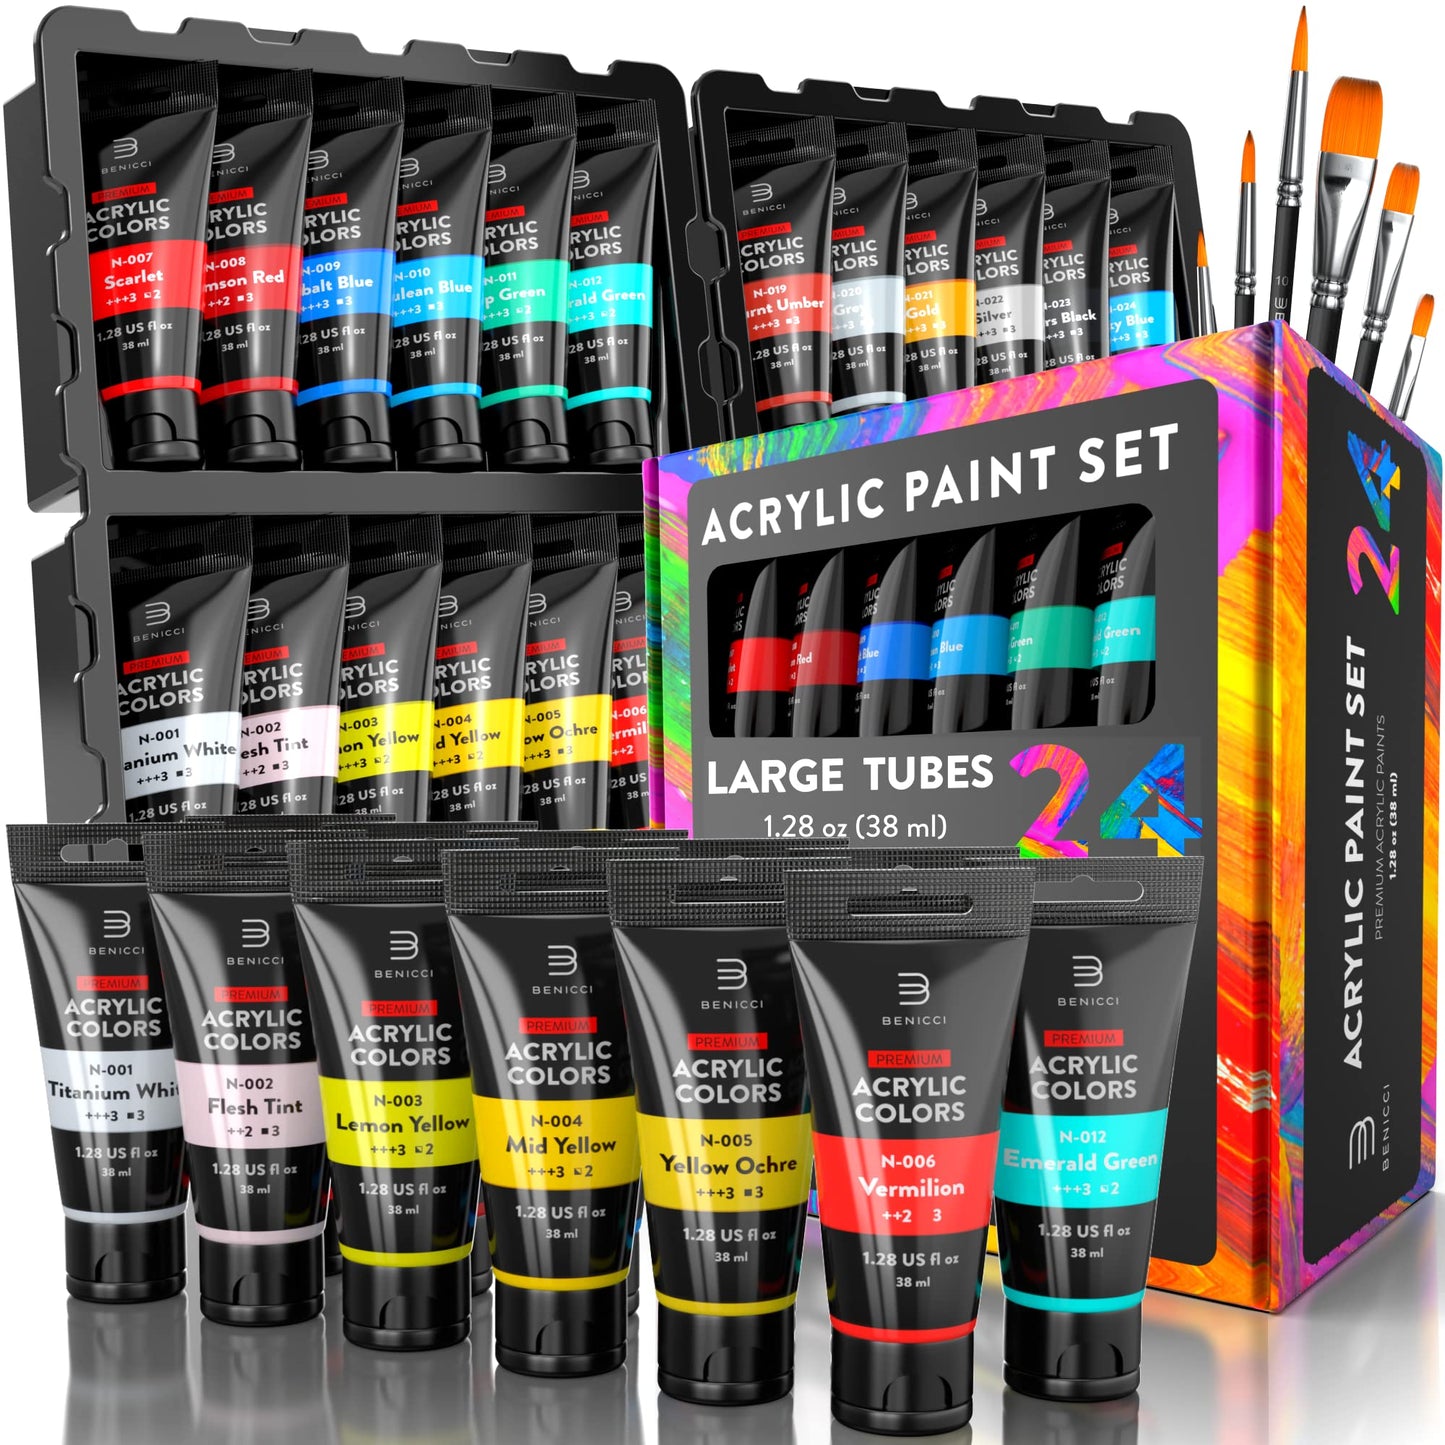 Premium Quality Acrylic Paint Set 24 Colors - 1.28oz (38ml) - with 6 Nylon Brushes - Safe for Kids & Adults - Perfect Kit for Beginners, Pros &